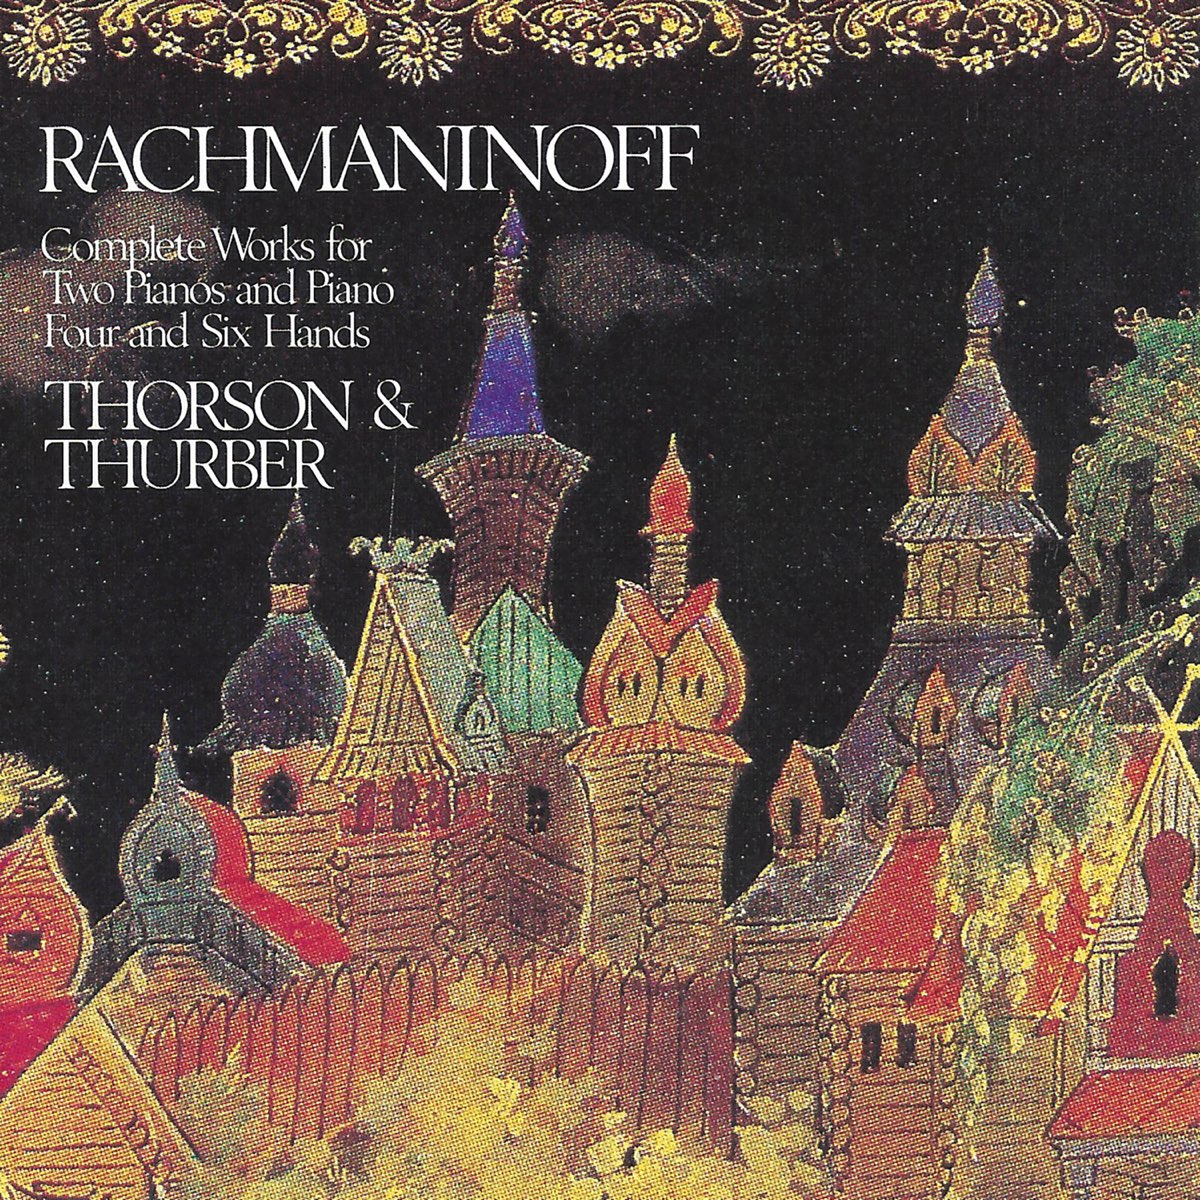 Rachmaninoff: Complete Works for Two Pianos - Album by Ingryd